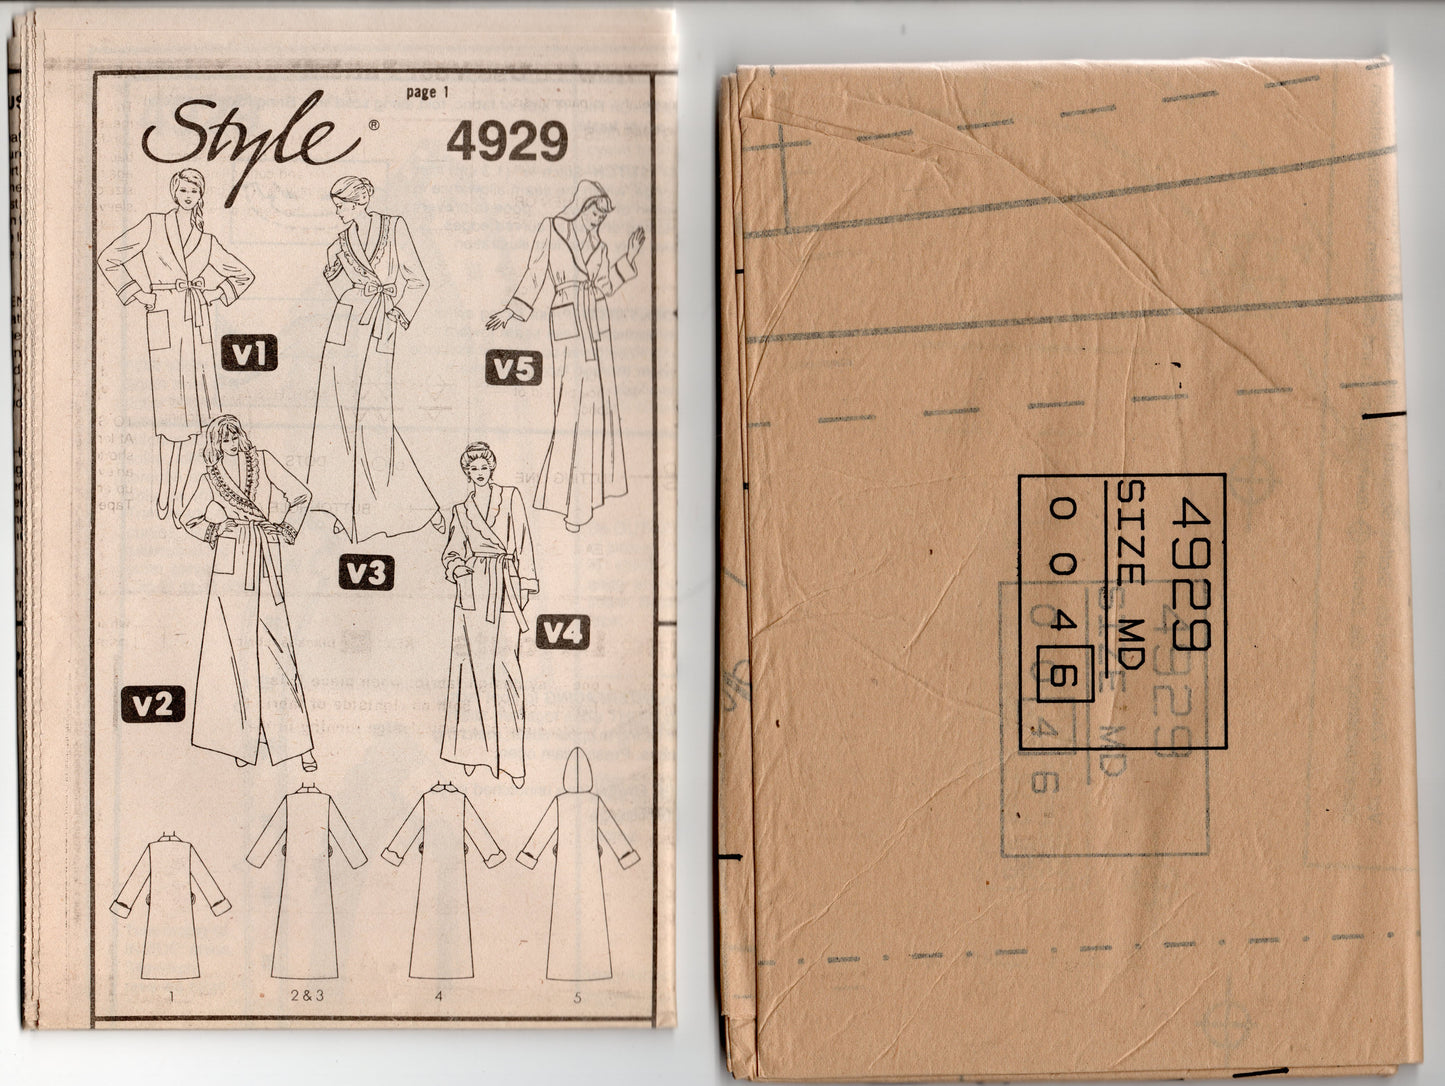 Style 4929 Womens Shawl Collar or Hooded Wrap Robe 1980s Vintage Sewing Pattern Size MEDIUM 14 - 16 UNCUT Factory Folded